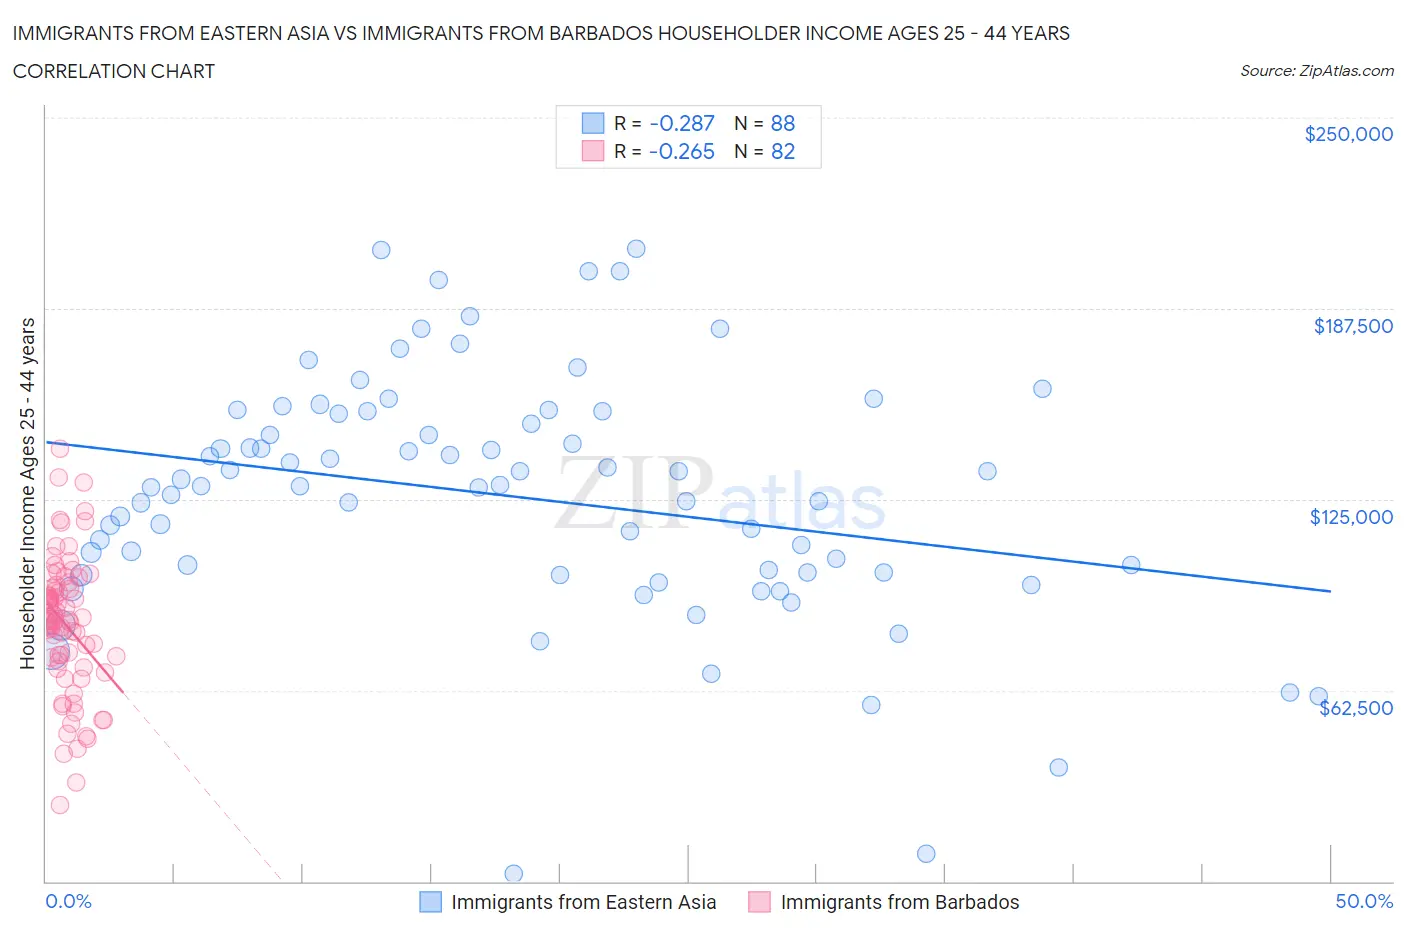 Immigrants from Eastern Asia vs Immigrants from Barbados Householder Income Ages 25 - 44 years